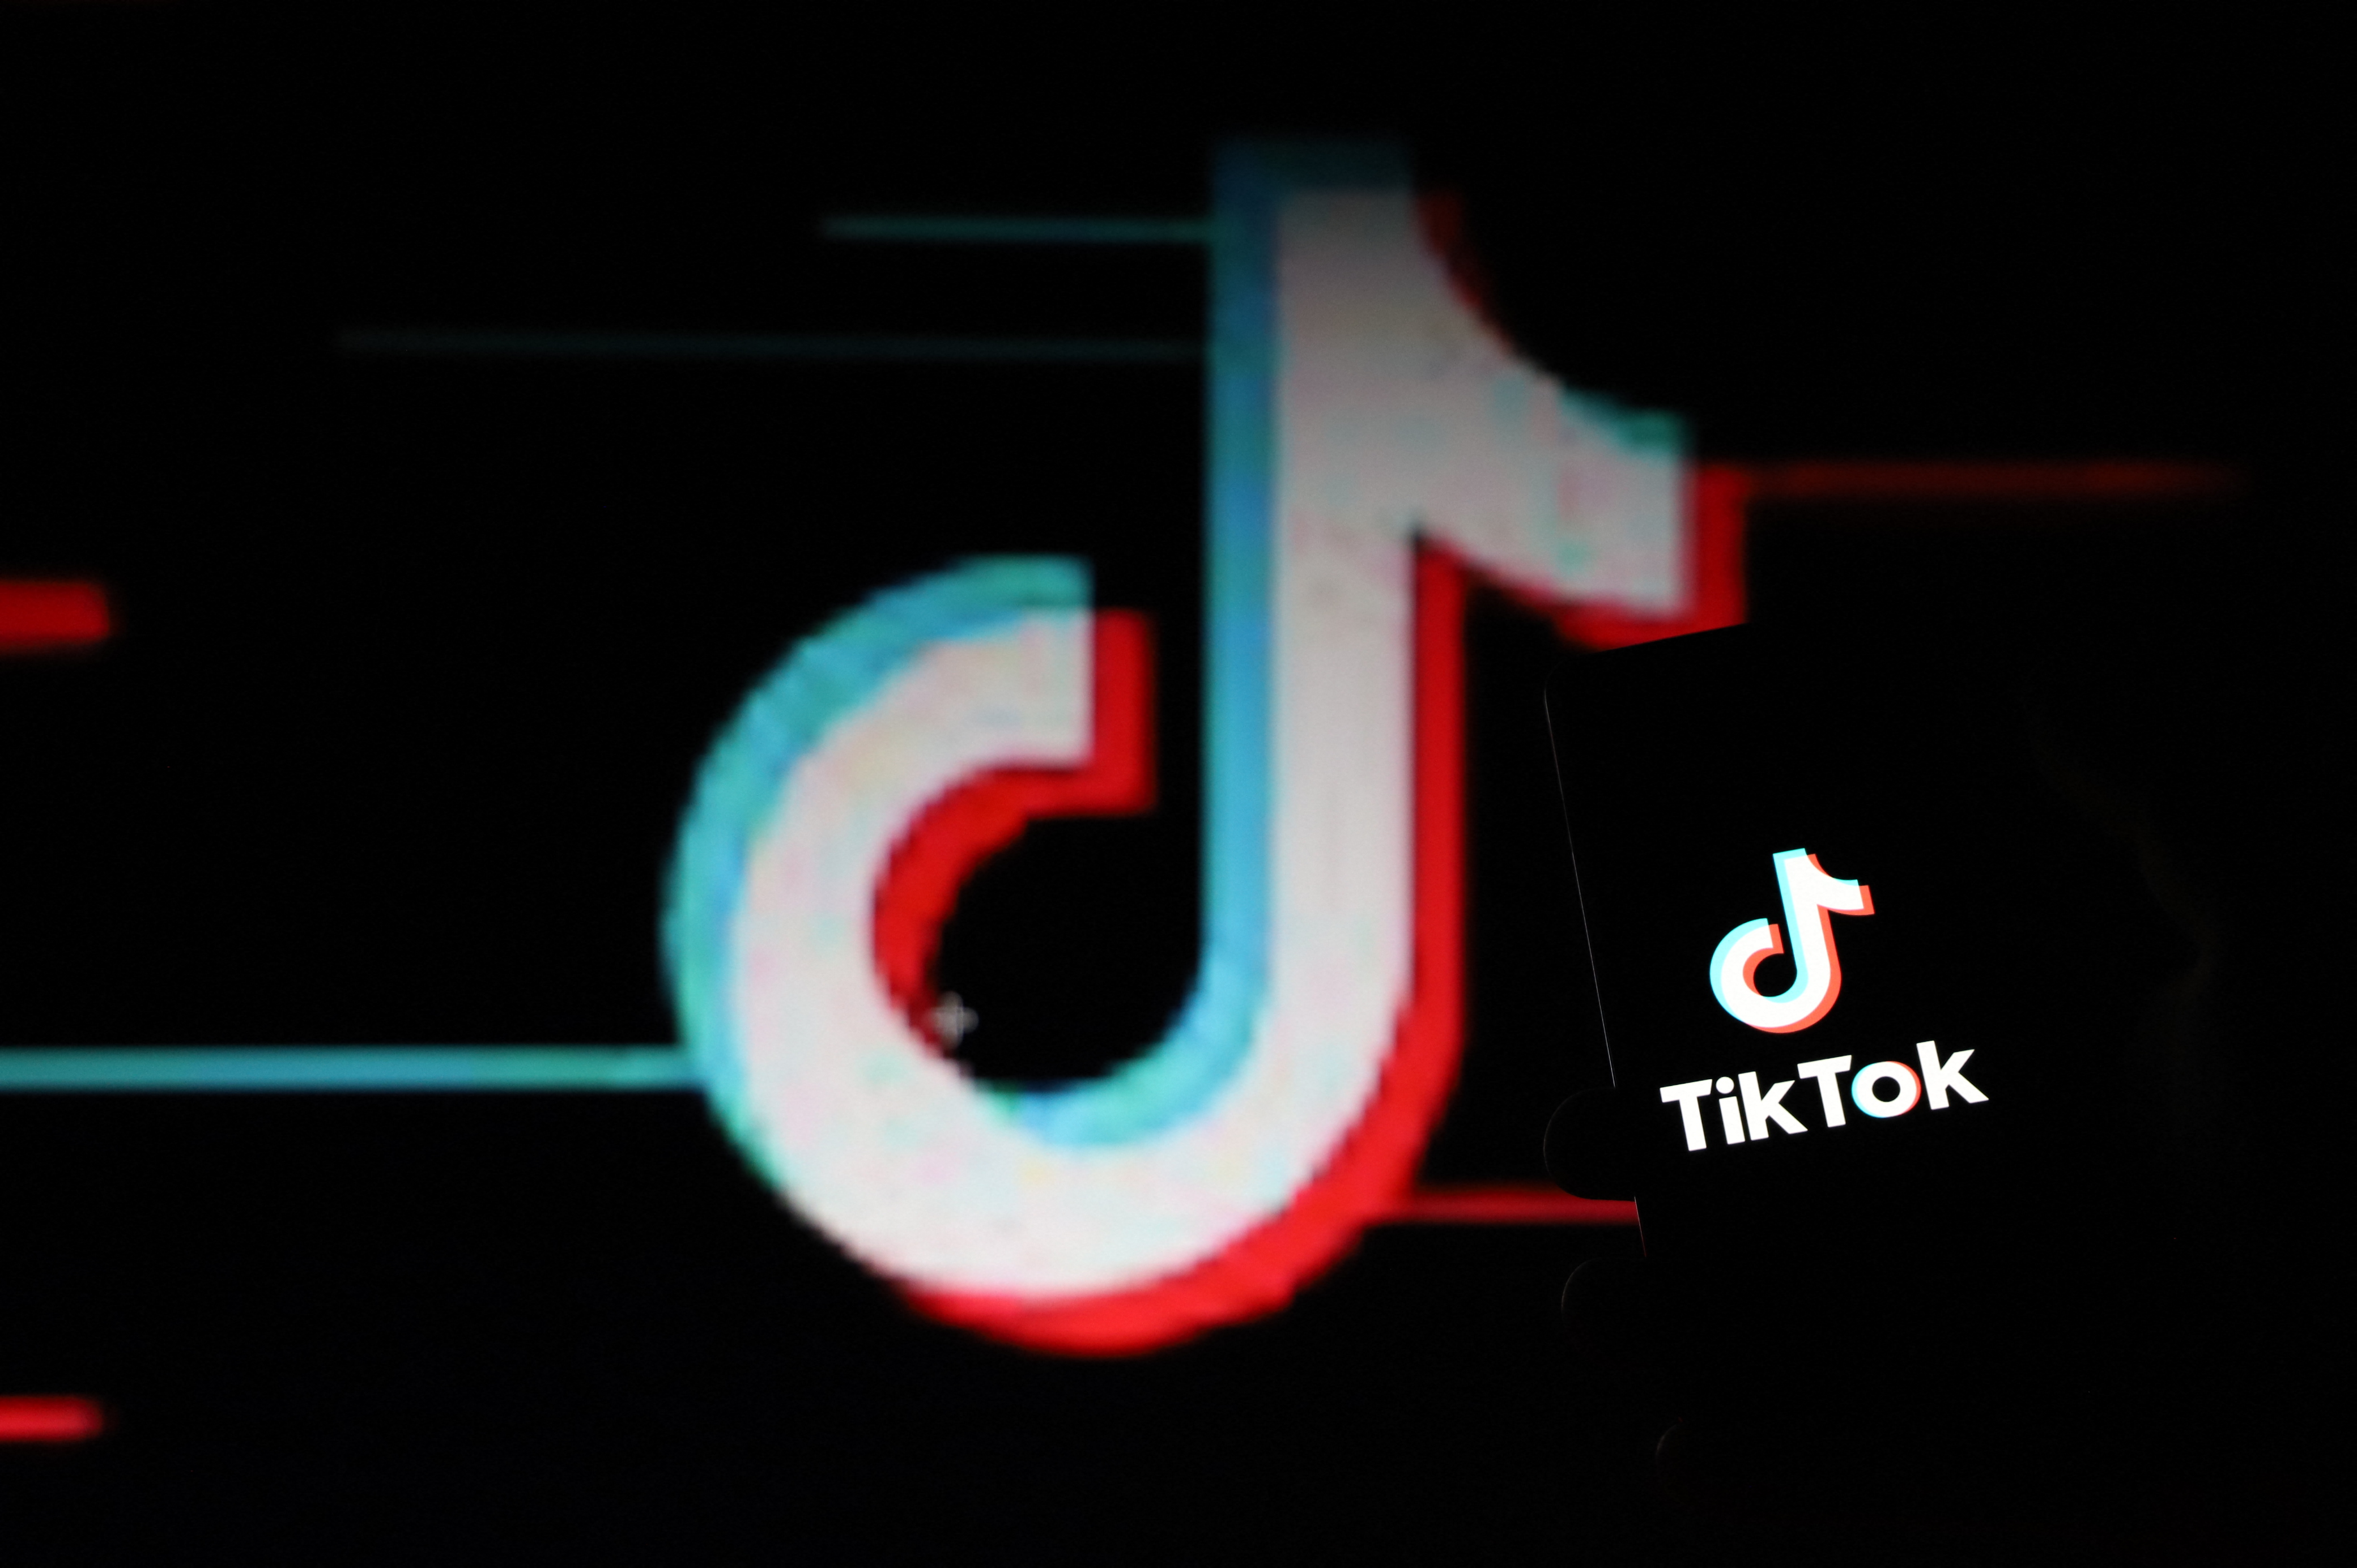 TikTok vows to sue over potential U.S. ban. What’s the legal outlook?